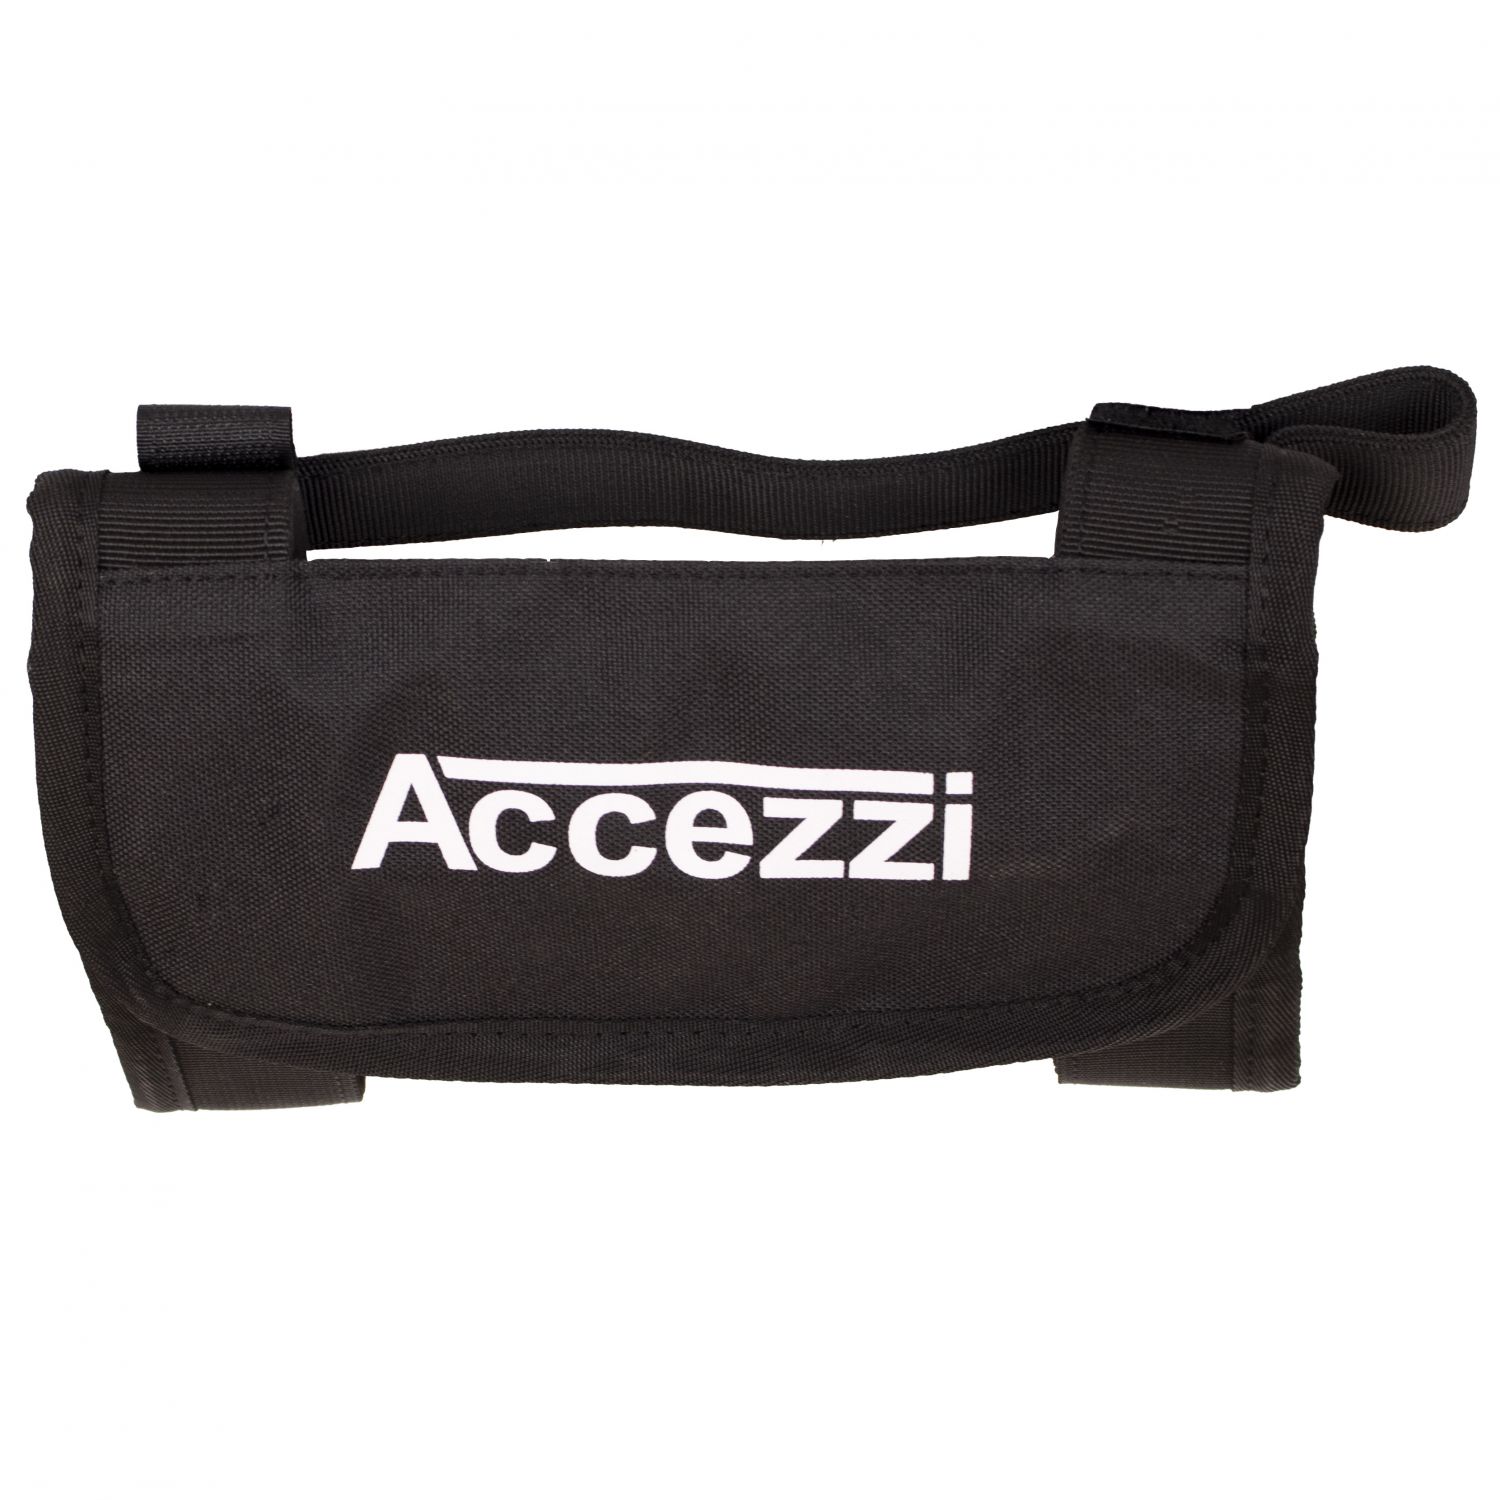 Accezzi Carry Nordic, ski carrier, langrend, sort